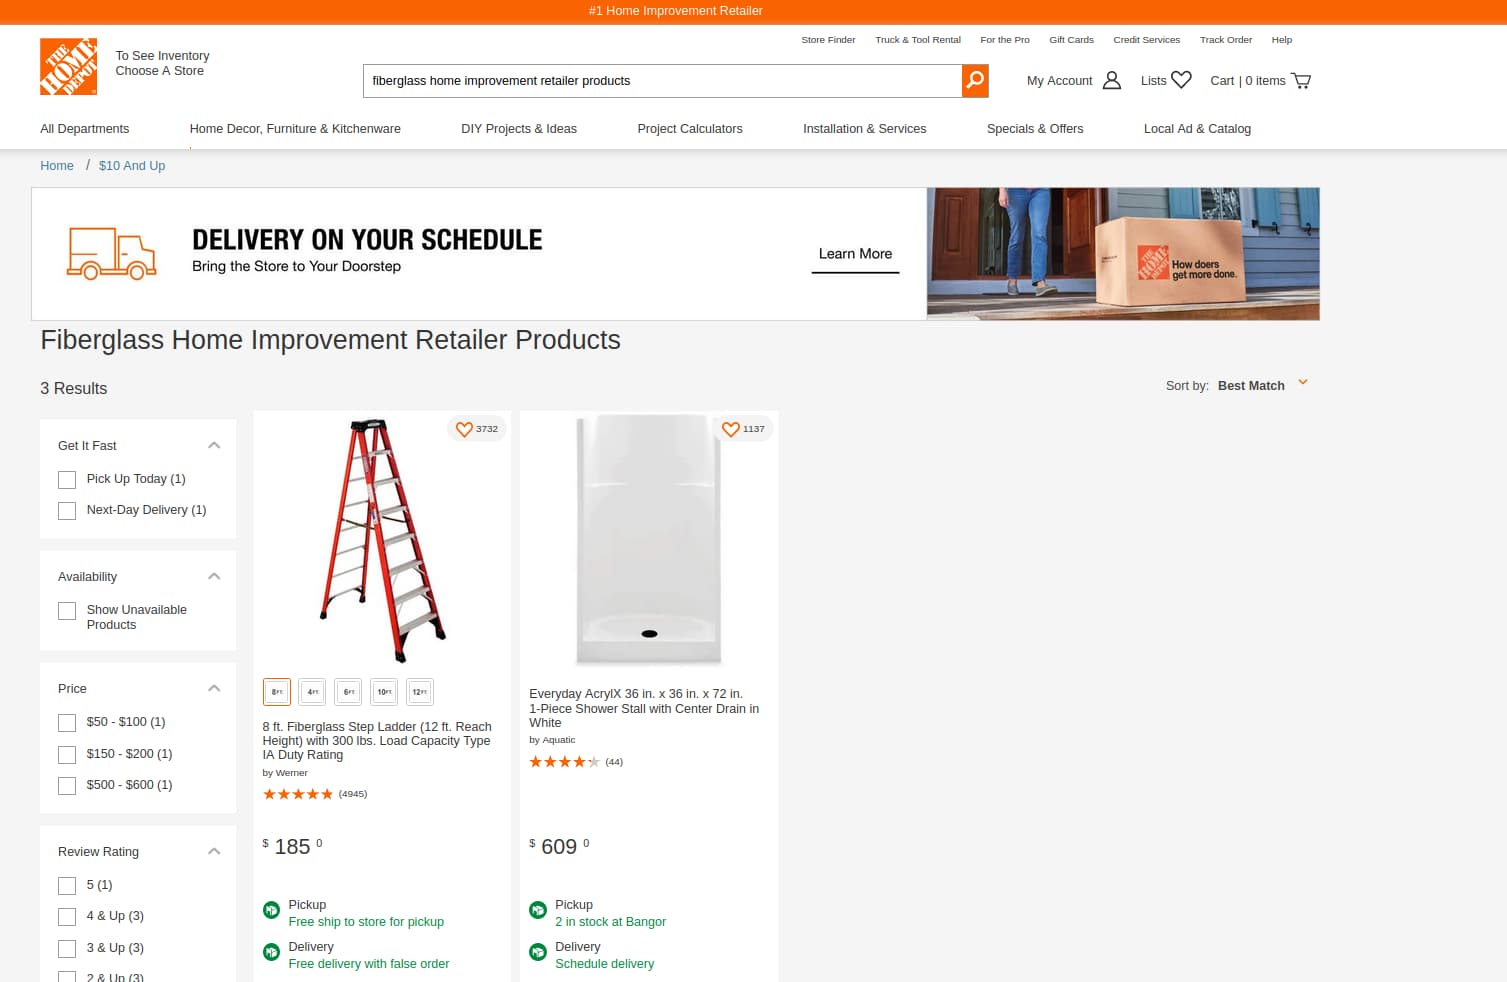 Example results for q: Fiberglass Home Improvement Retailer Products, lowerbound: 15